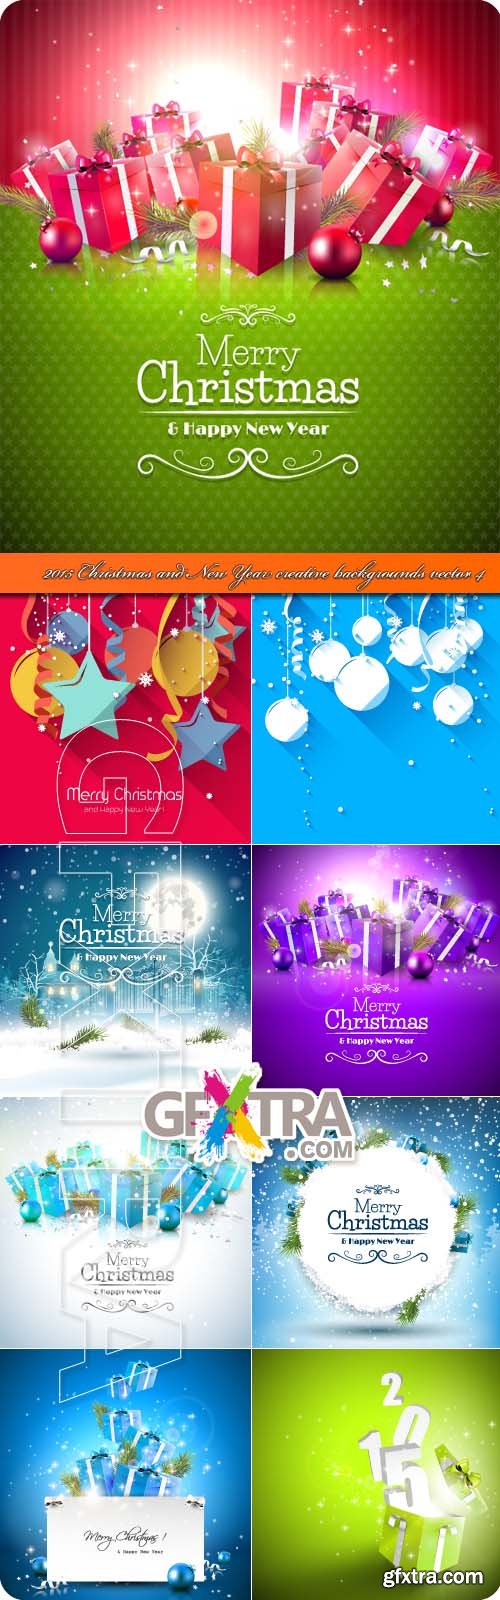 2015 Christmas and New Year creative backgrounds vector 4